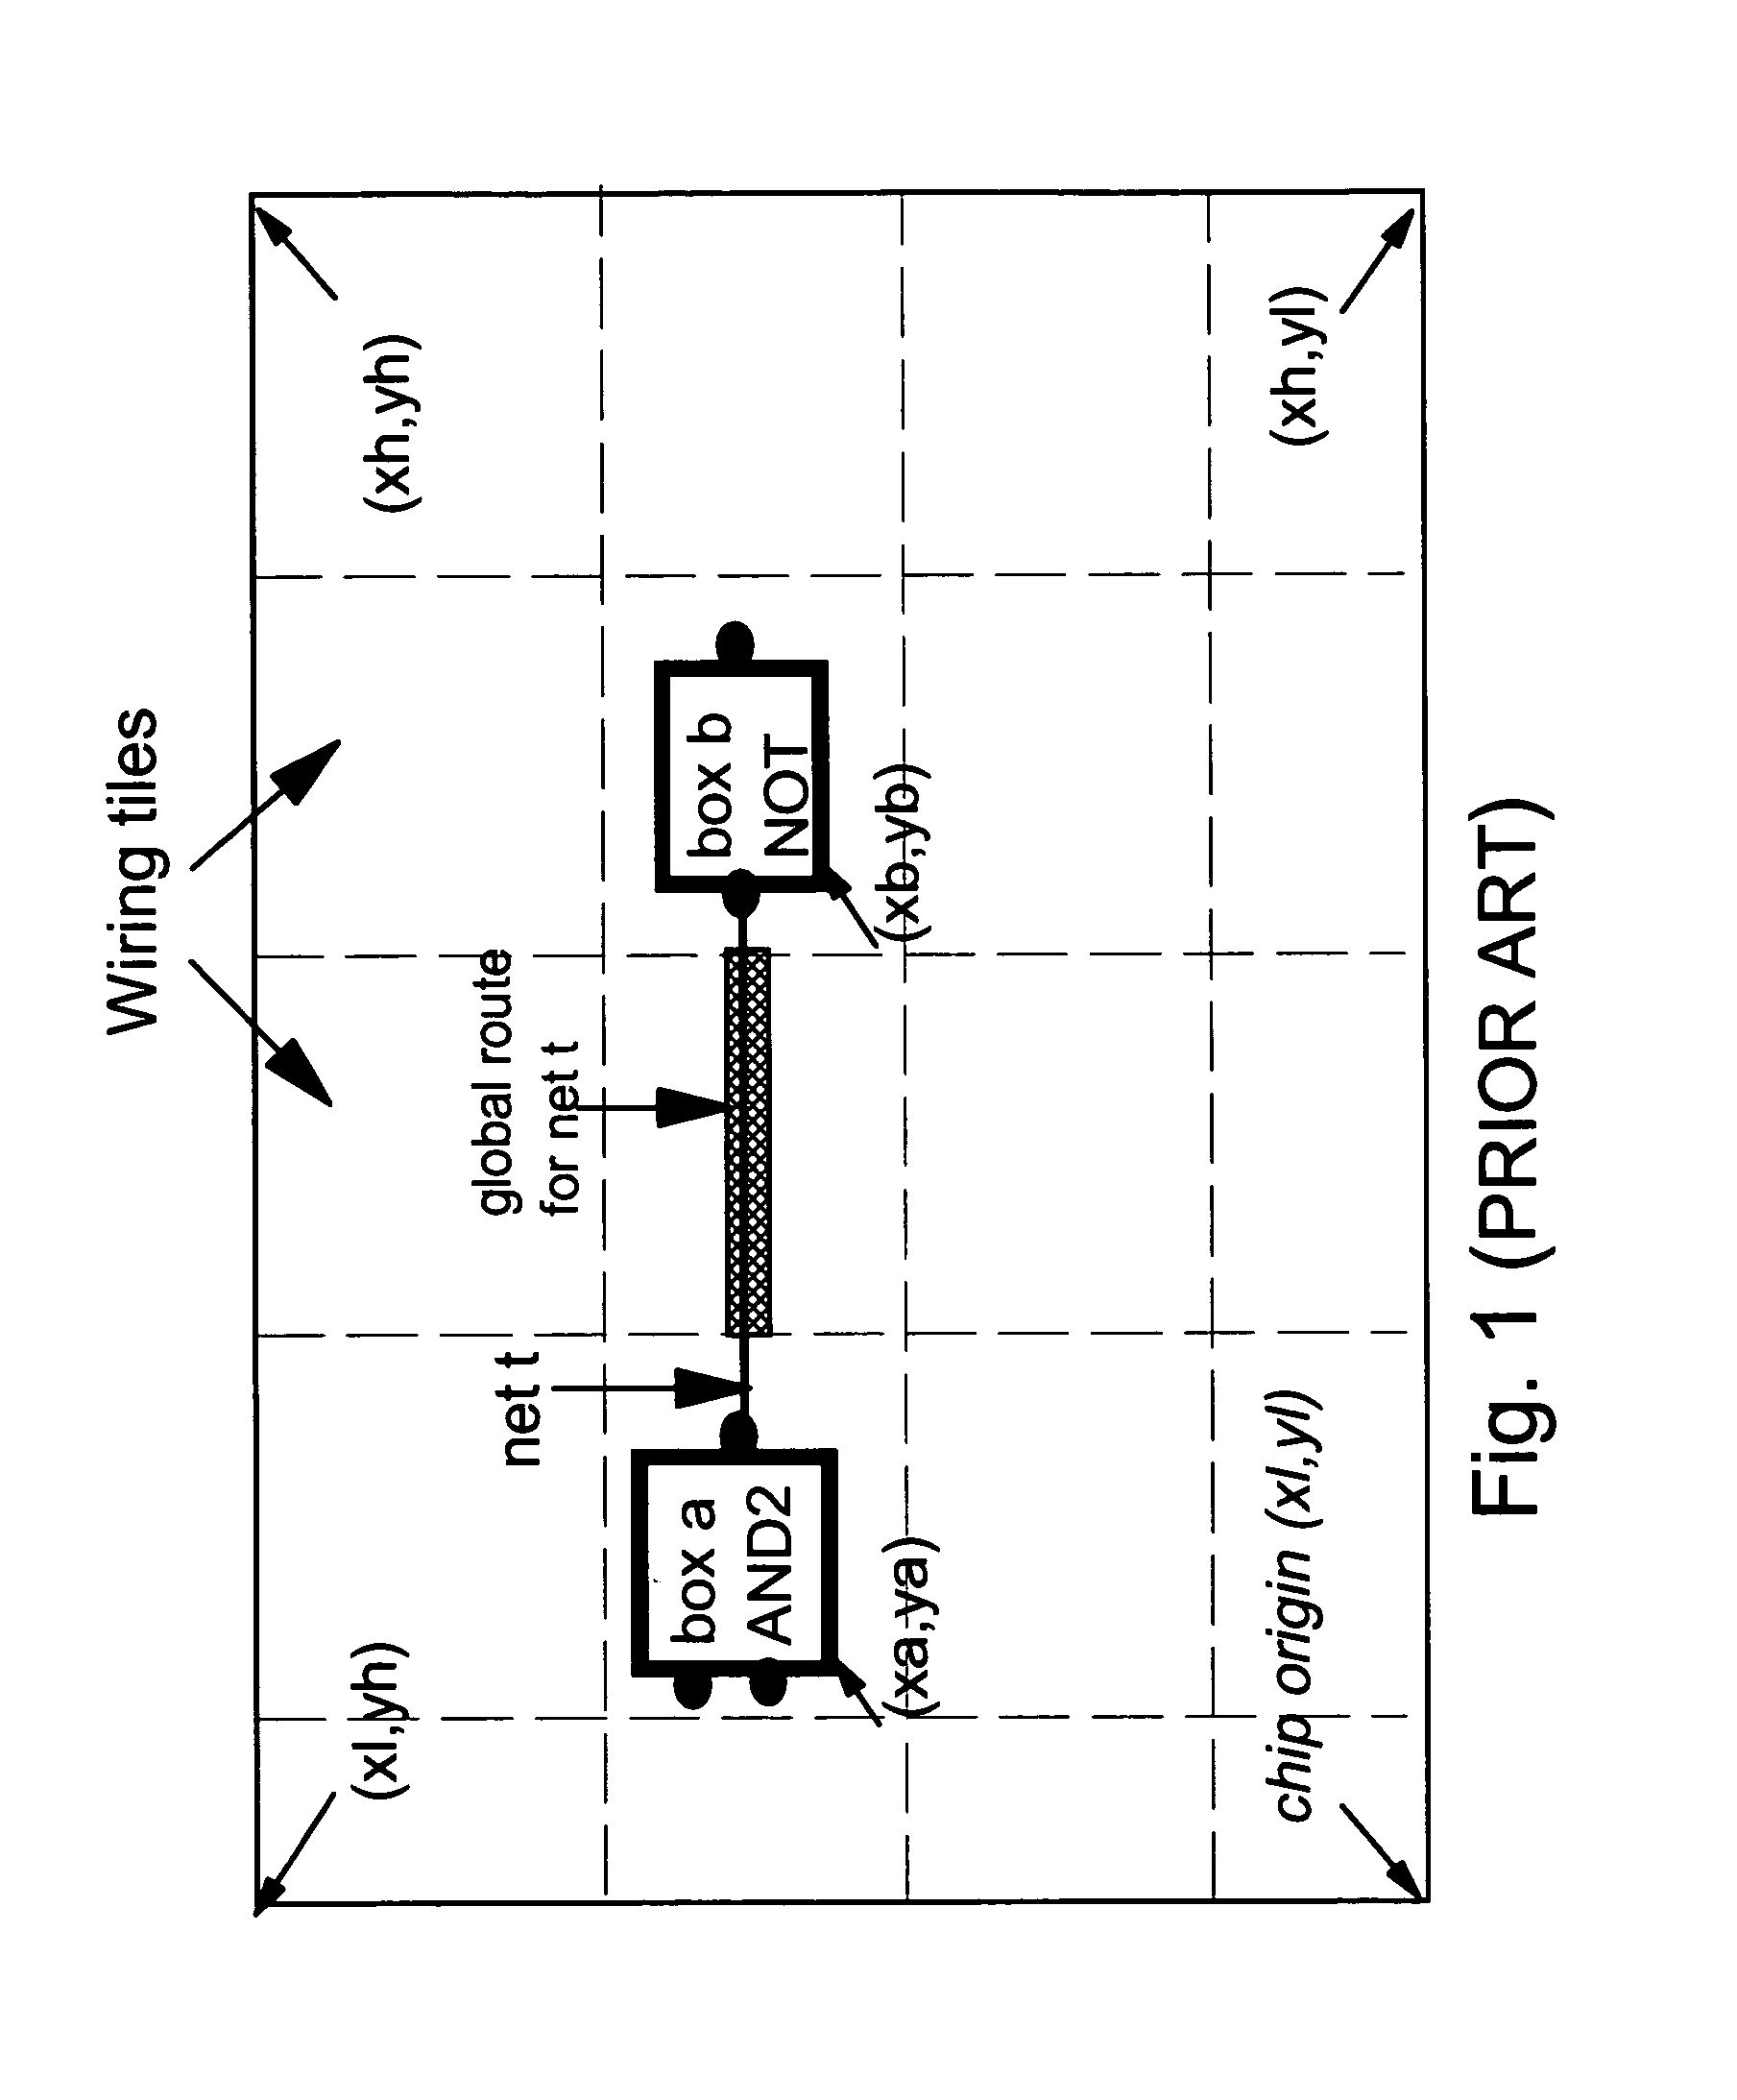 Method for reducing wiring congestion in a VLSI chip design